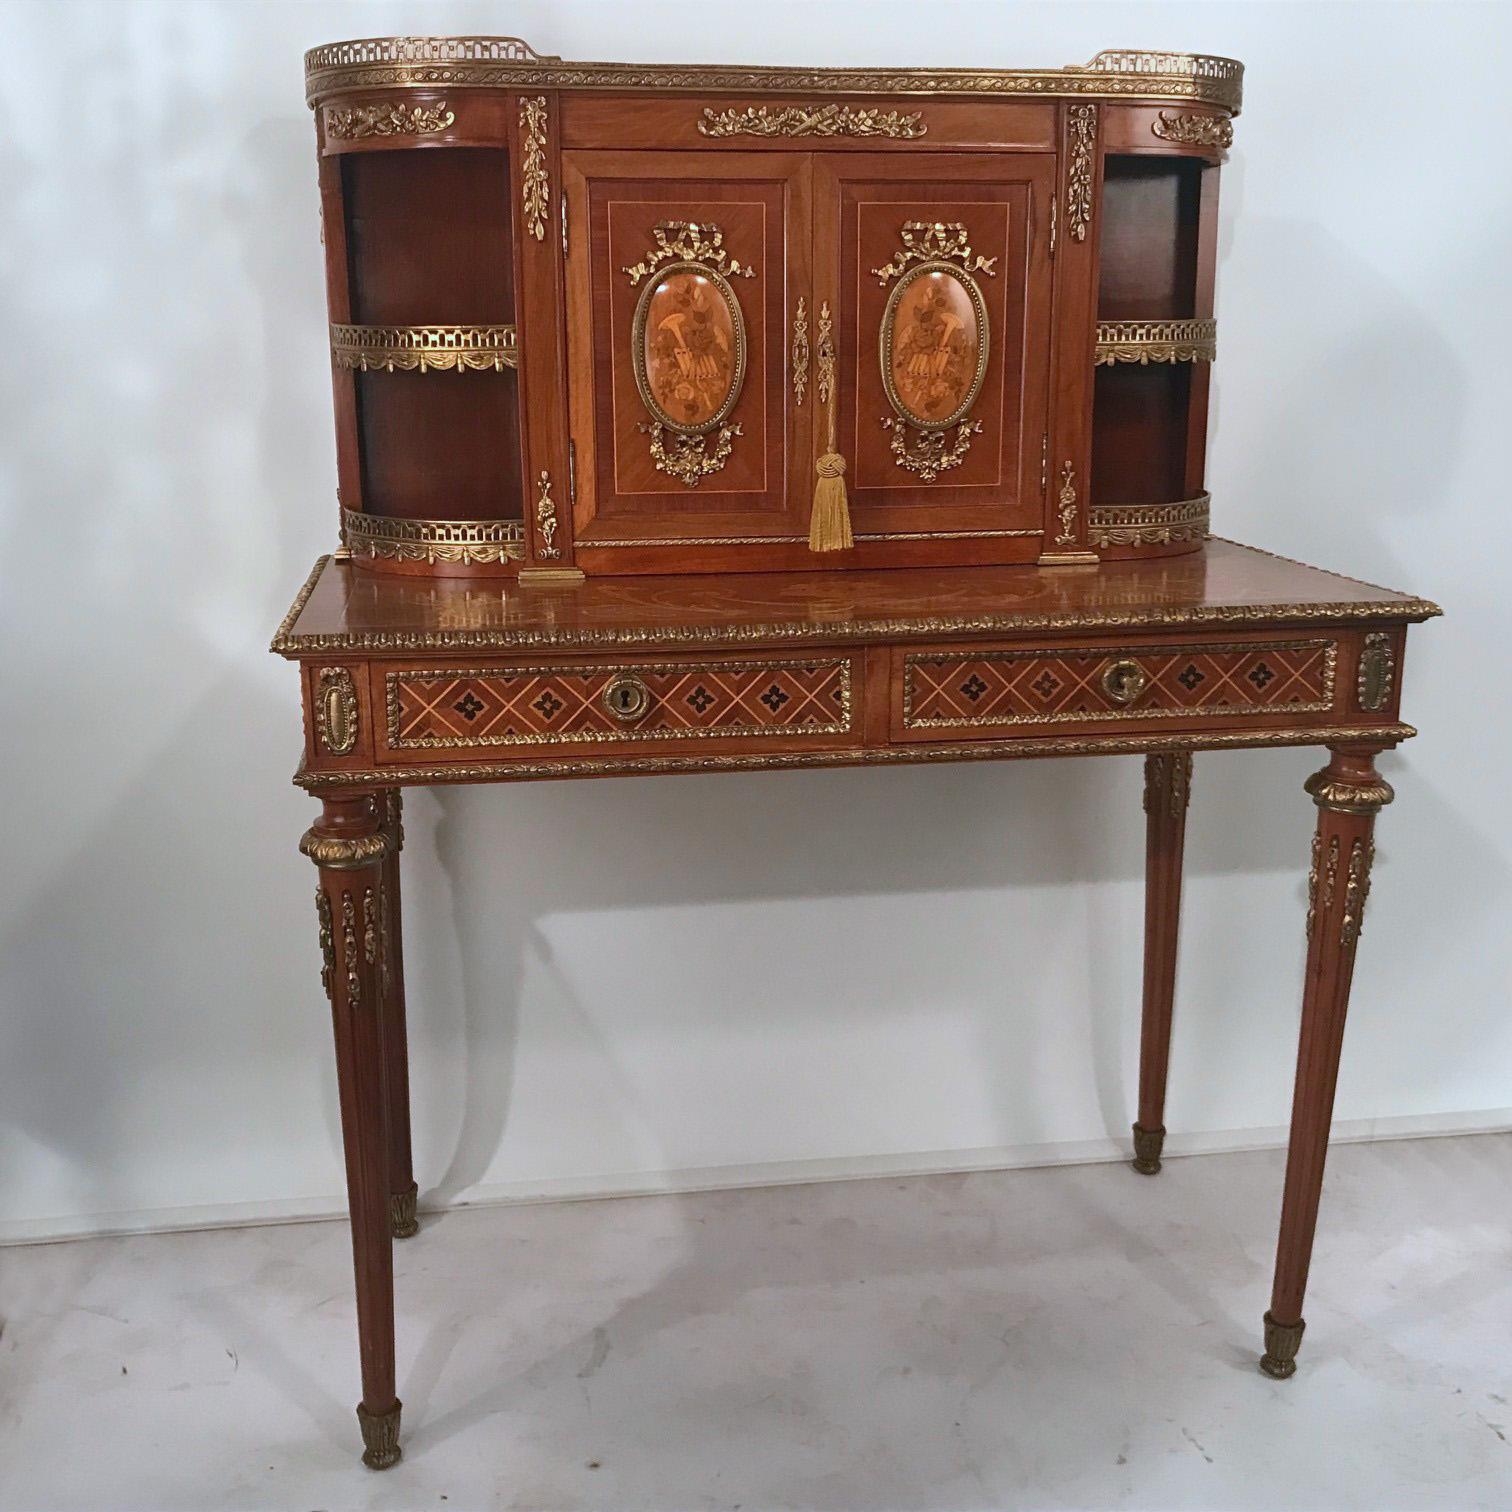 A writing table with a fitted superstructure, this beautifully crafted and elegant piece has all the positive attributes. The upper section is enclosed by a pair of doors each with oval panels inlaid with musical trophies; the lower with two frieze